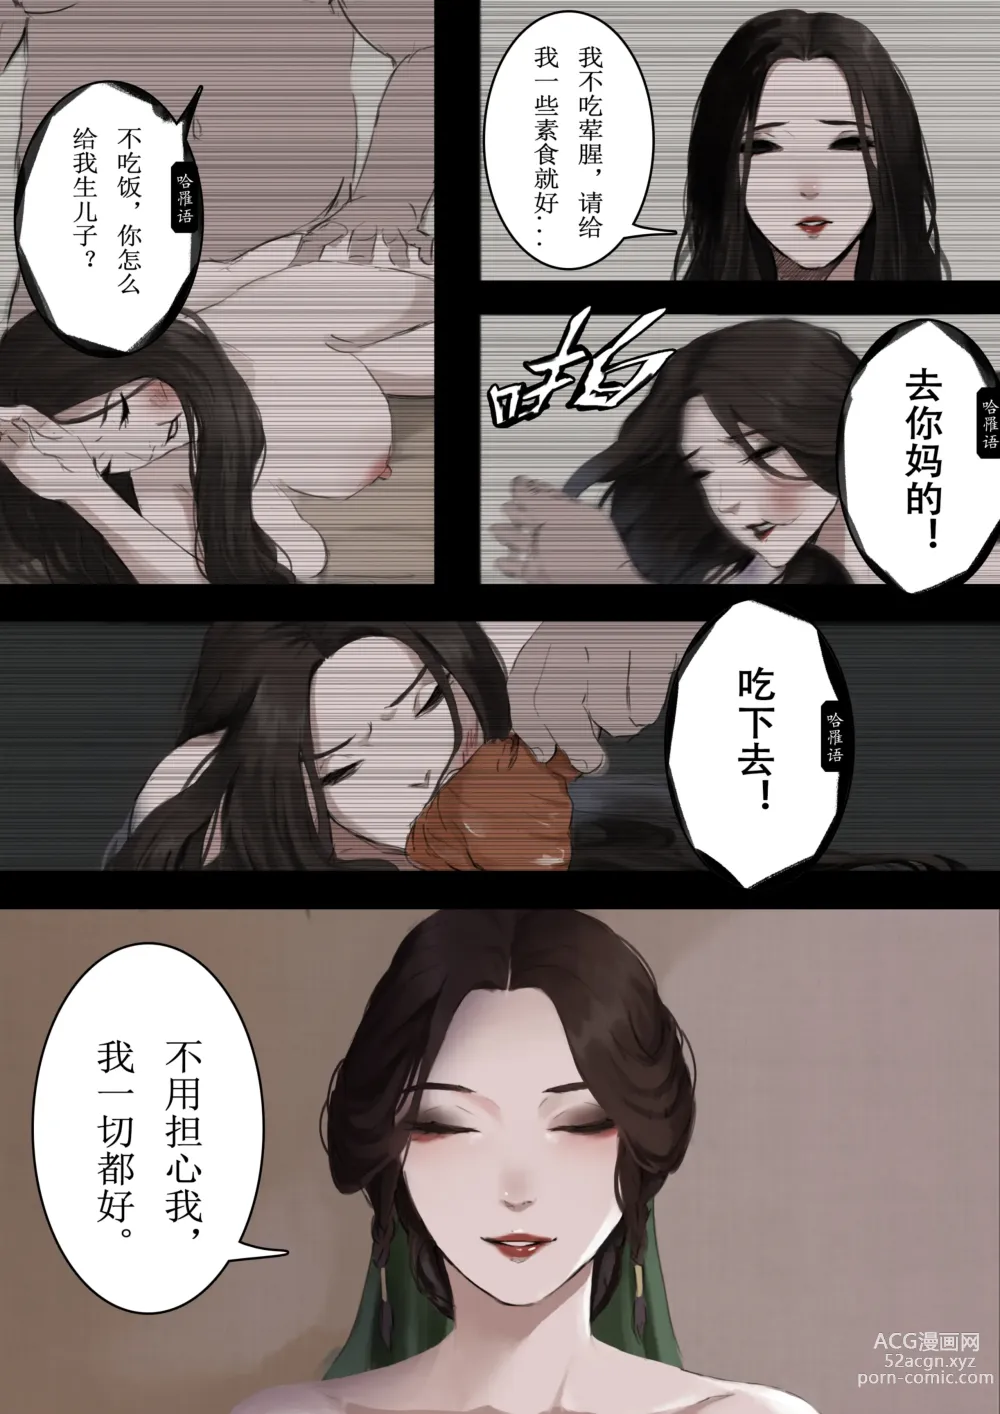 Page 10 of doujinshi 砂中莲